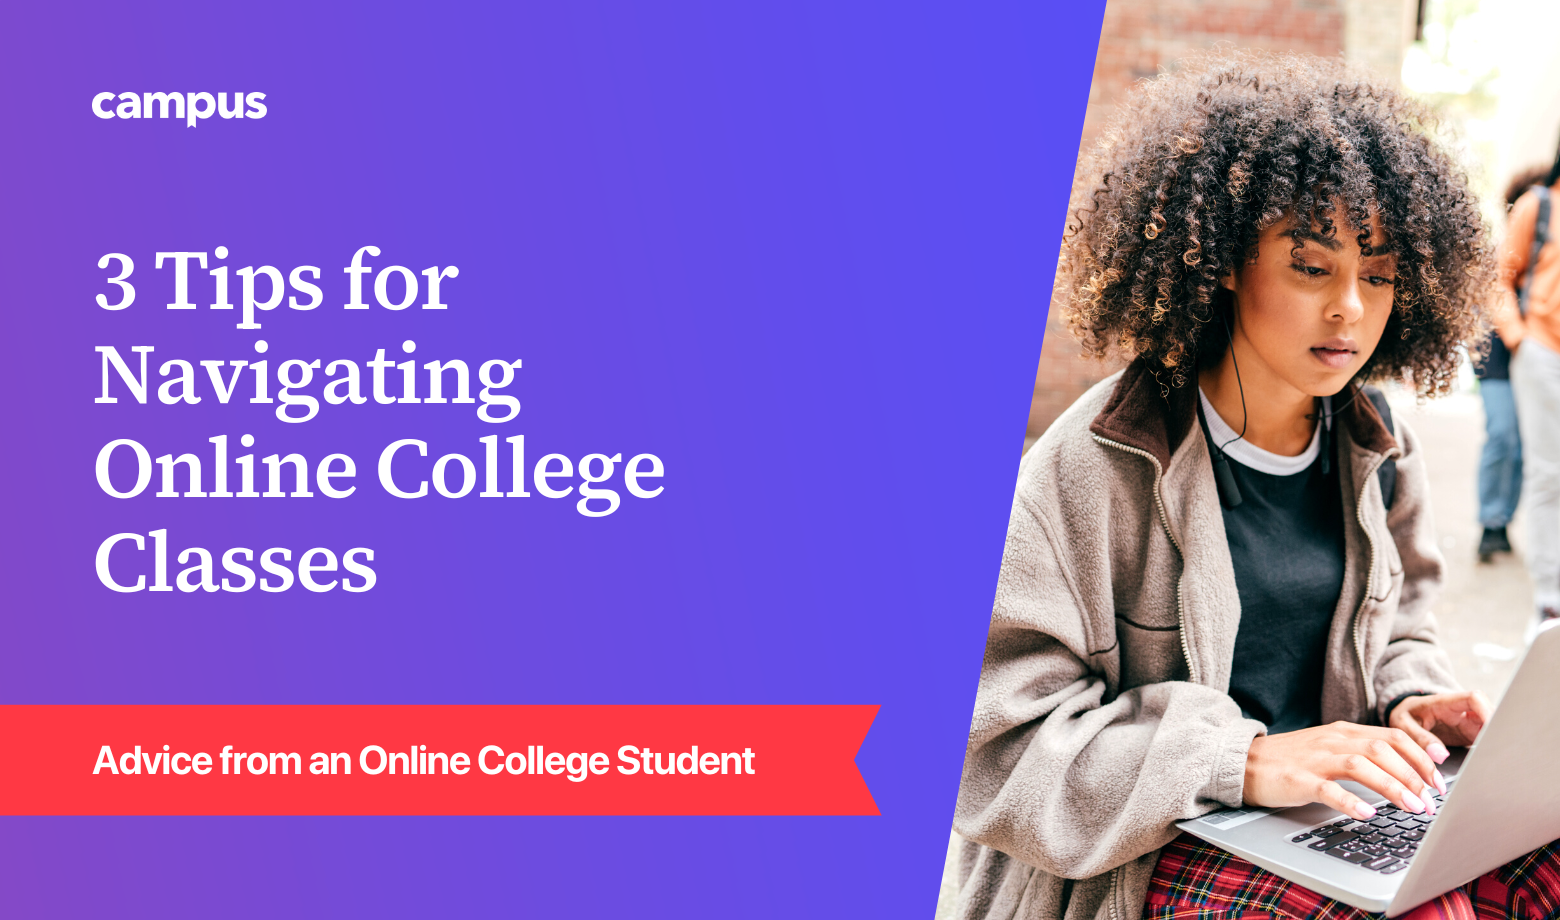 How to Make the Most of Your Online Classes (from an Online College Student)